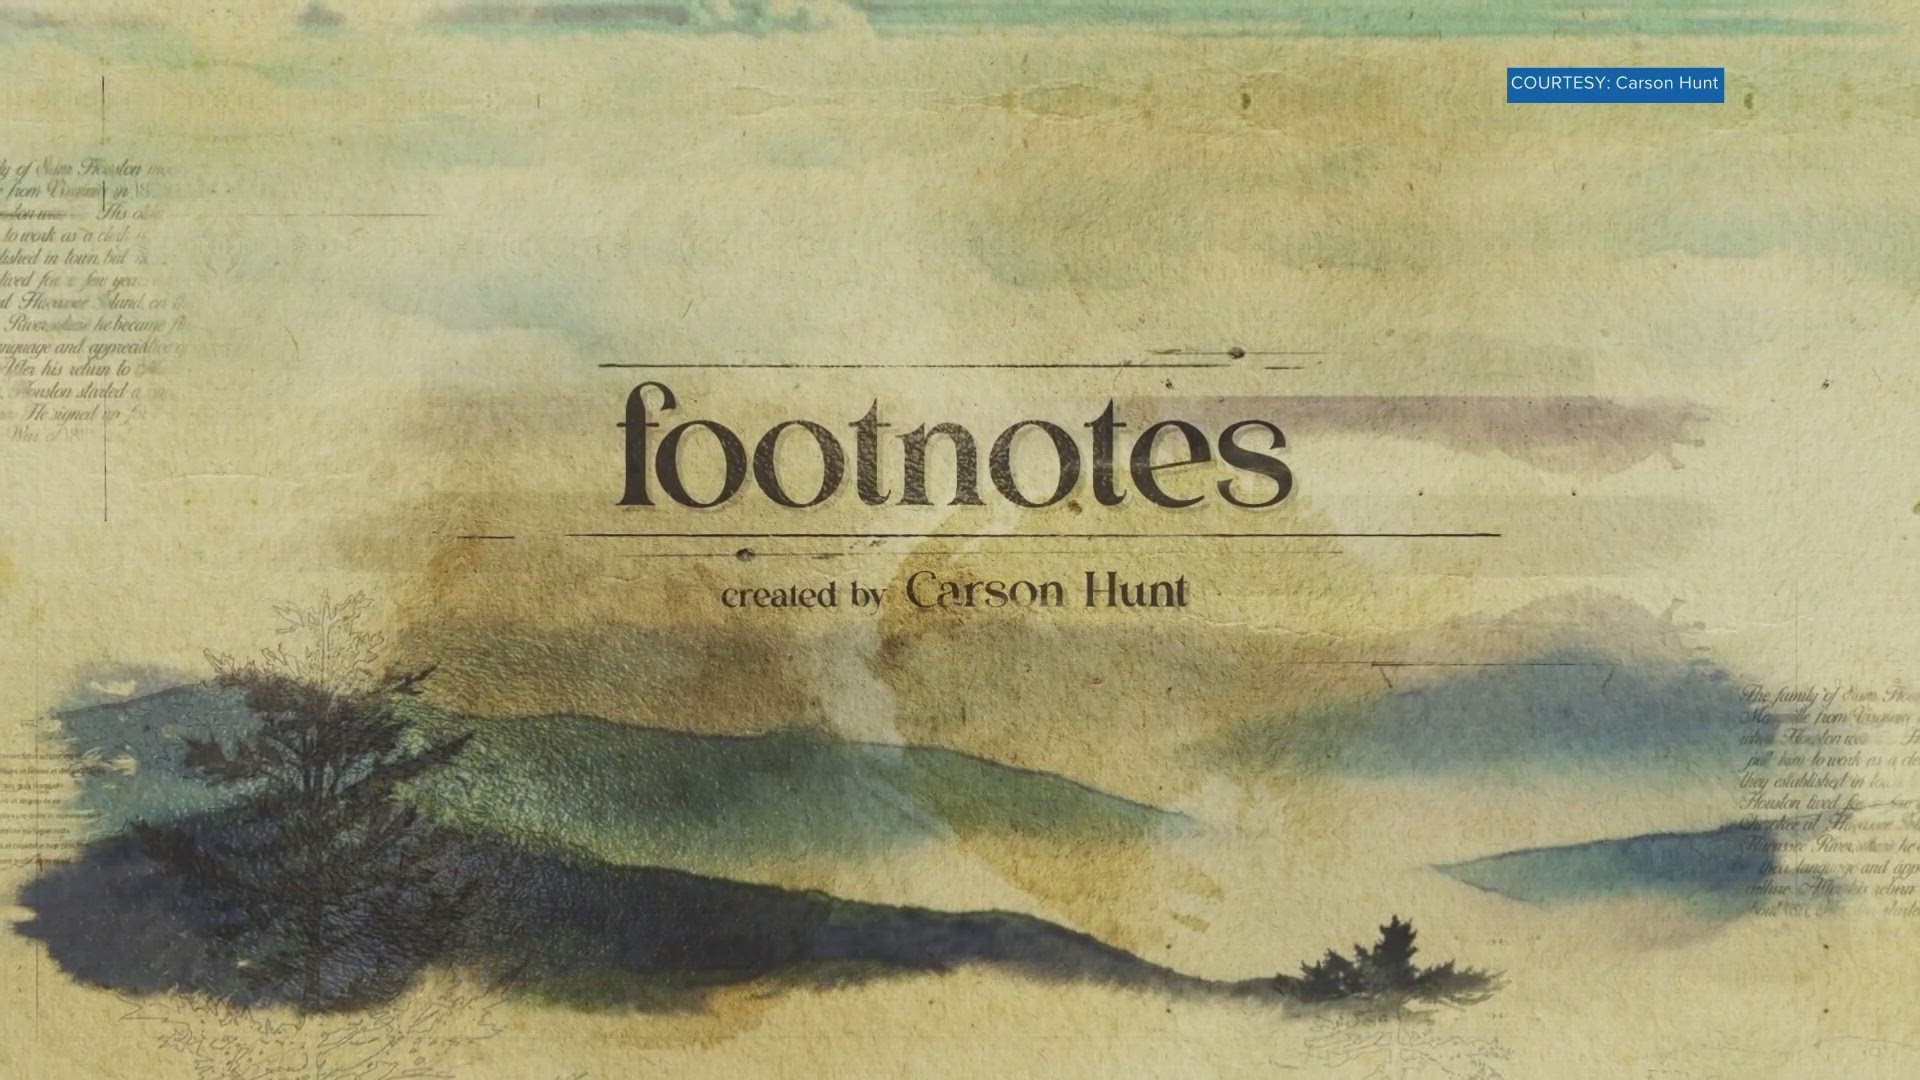 Carson Hunt's YouTube series "FootNotes" was inspired by WBIR's "The Heartland Series."